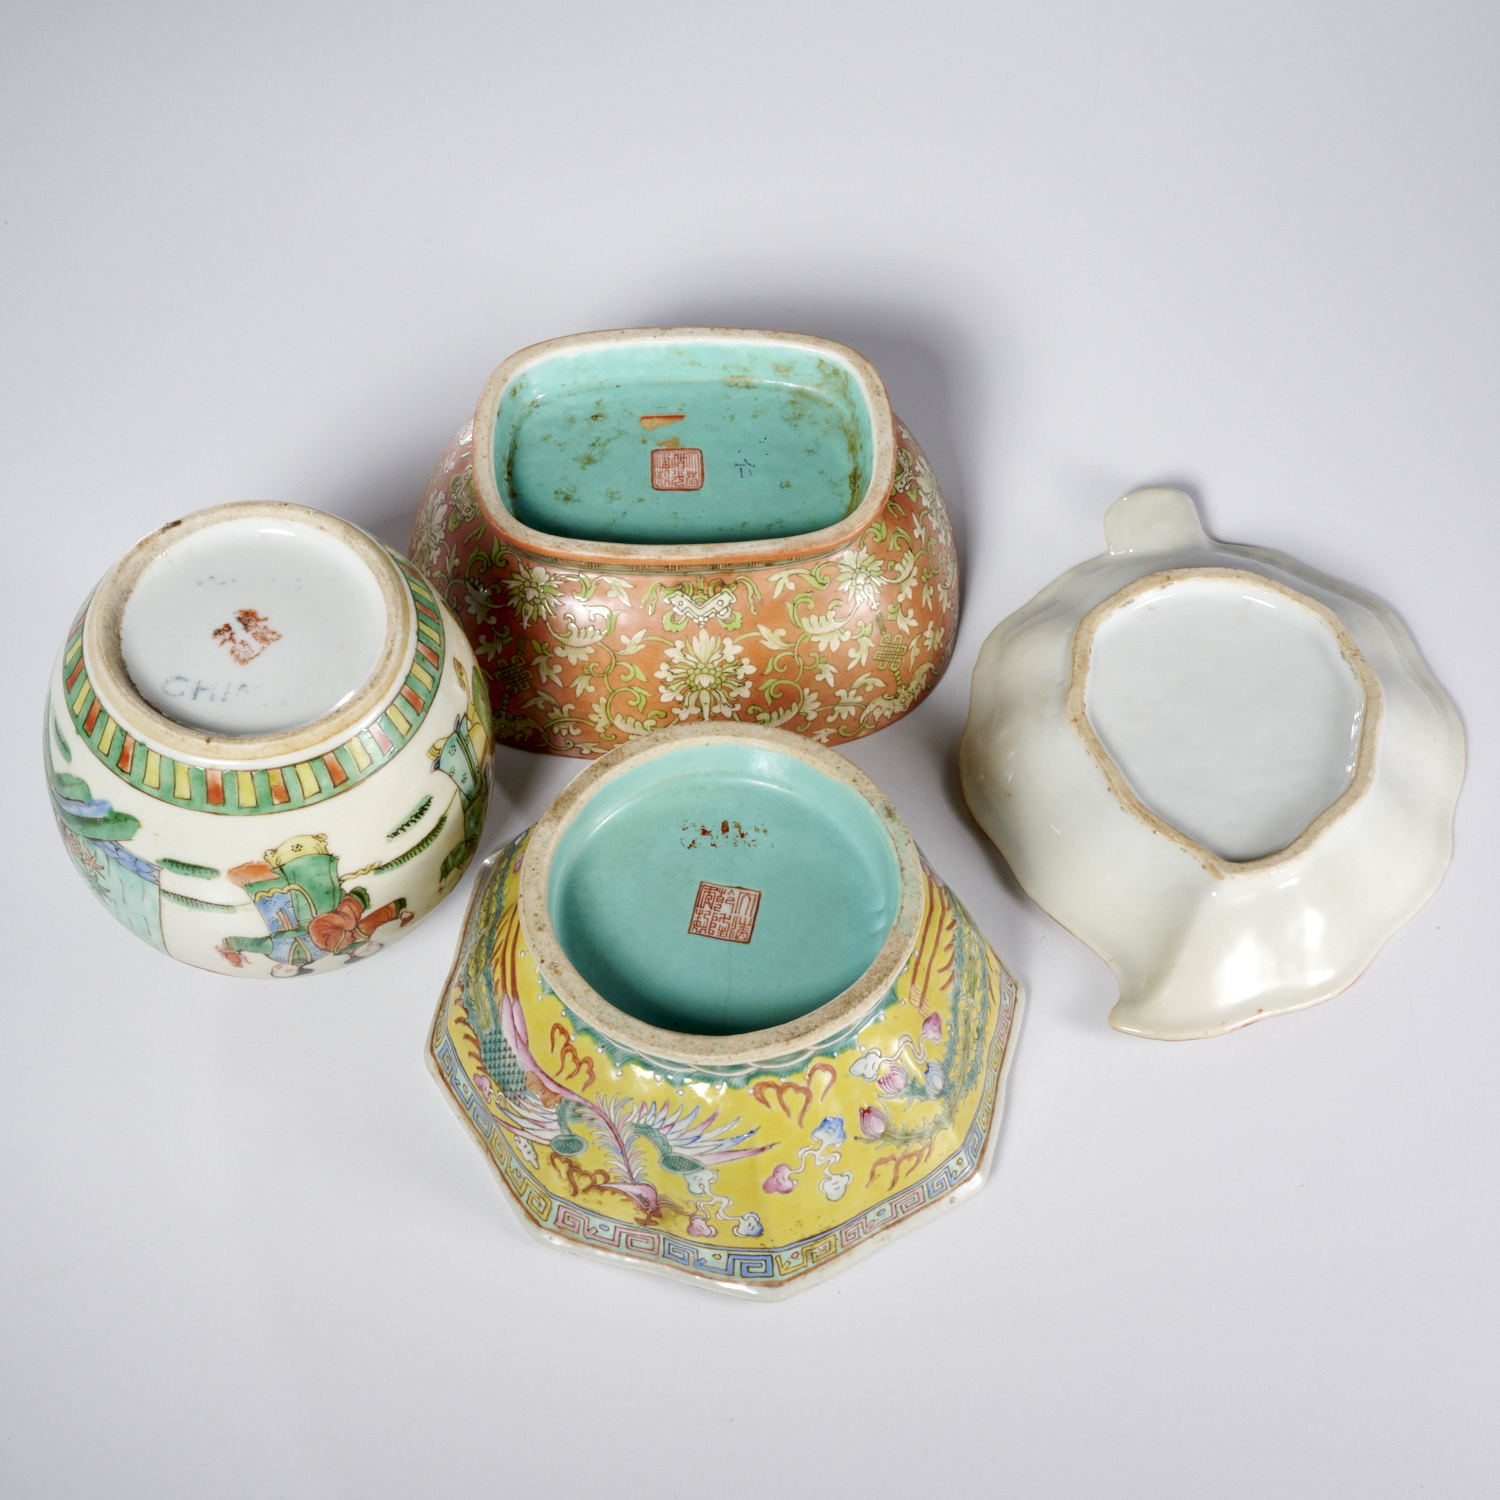 ANTIQUE CHINESE PORCELAIN GROUP